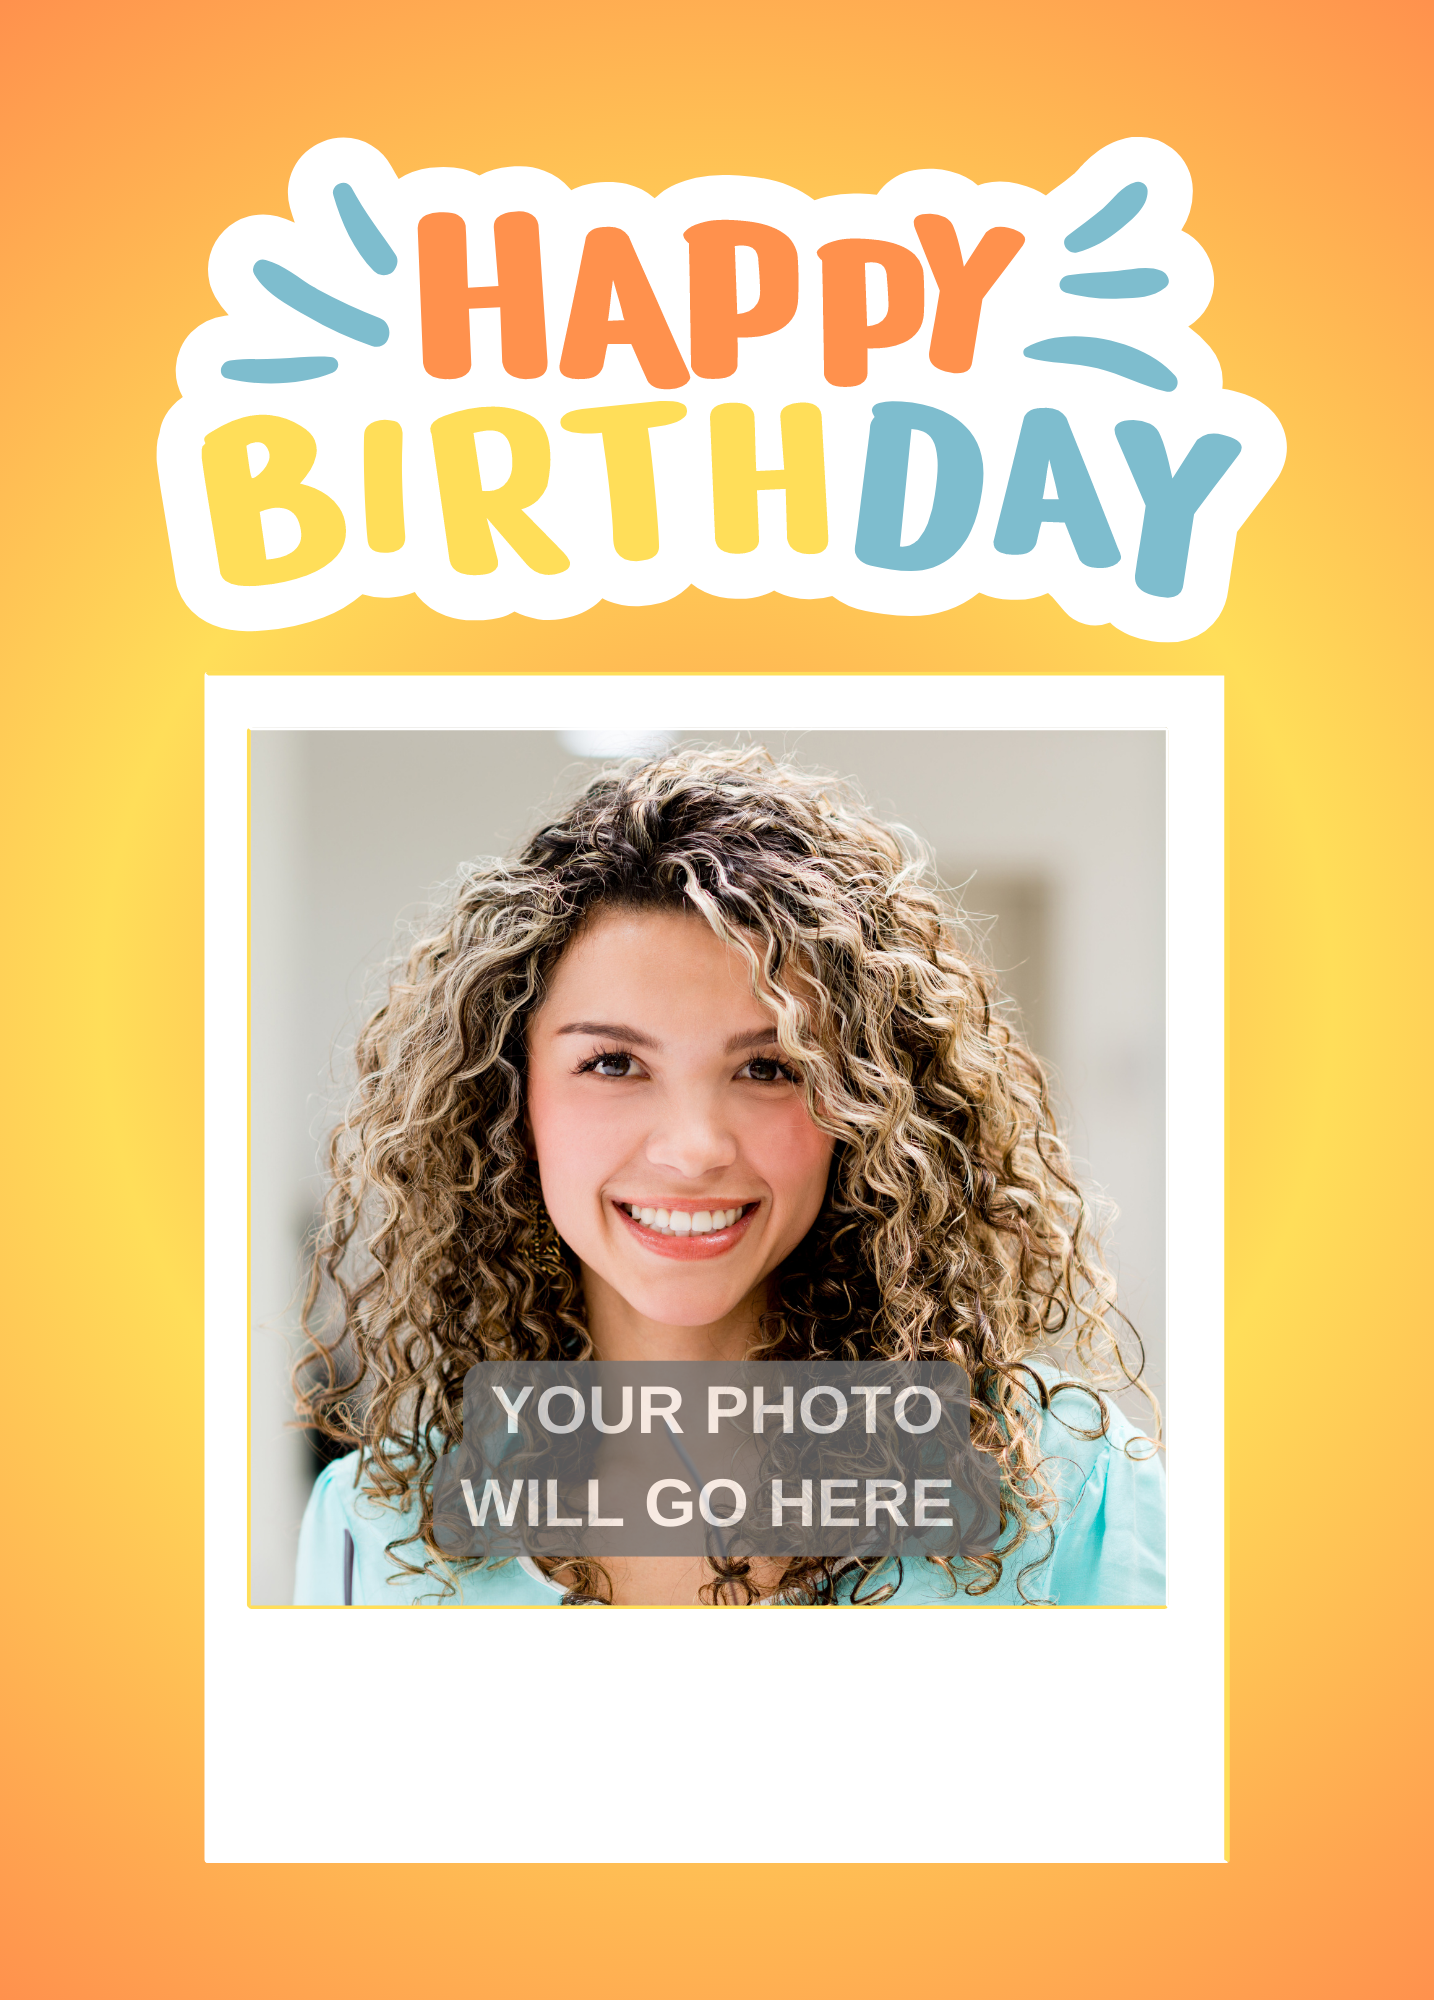 Happy Birthday Photo Card (Orange & Yellow) - Personalized Greeting Card for Someone in Jail or Prison